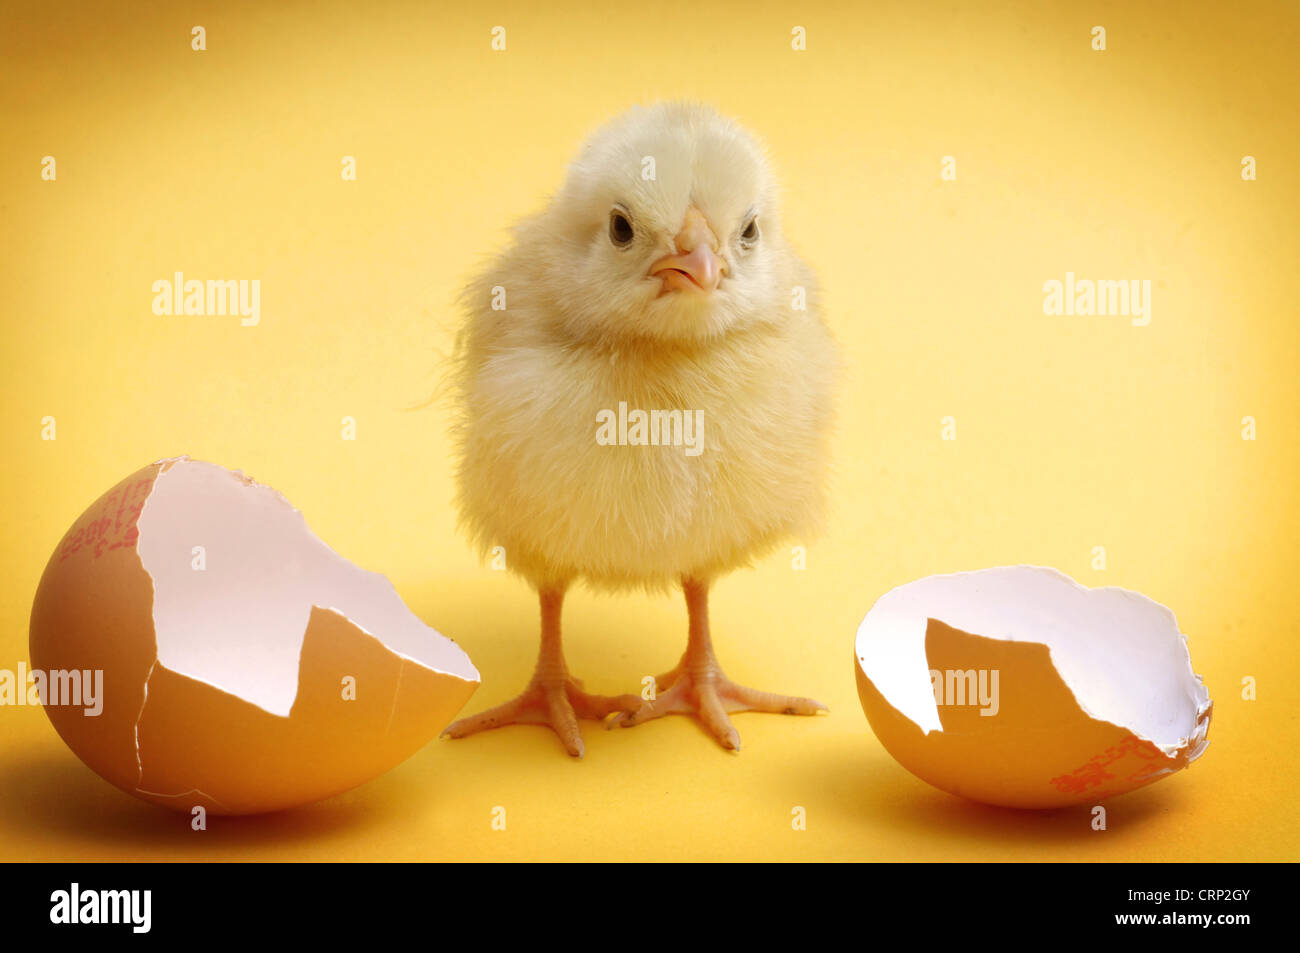 Just arrived - a yellow chick stands between two halves of a broken egg shell. Stock Photo